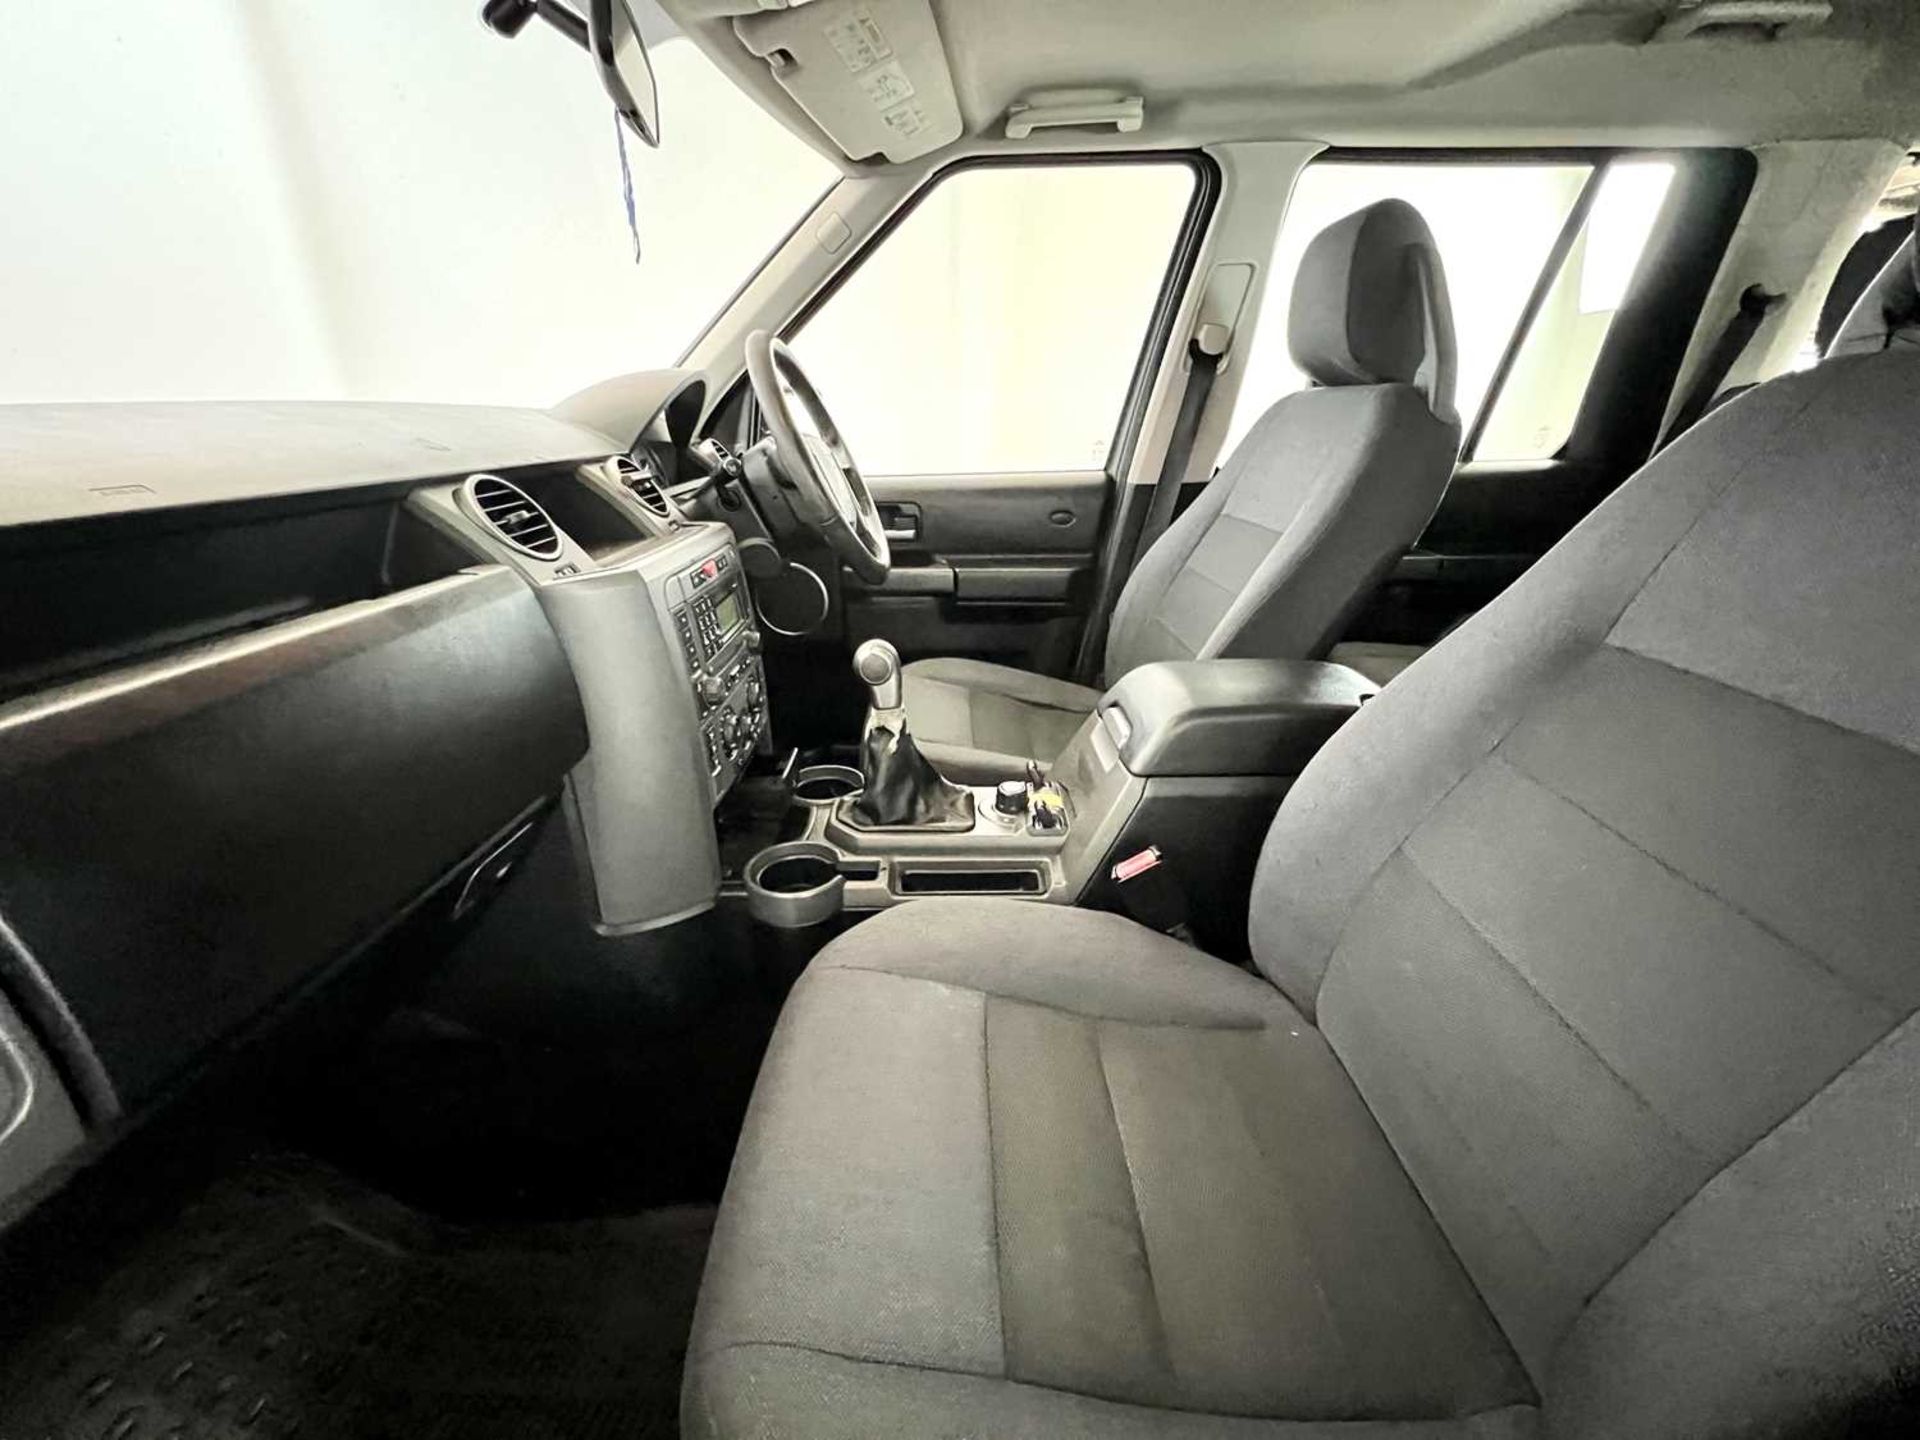 2005 Land Rover Discovery - Image 28 of 36